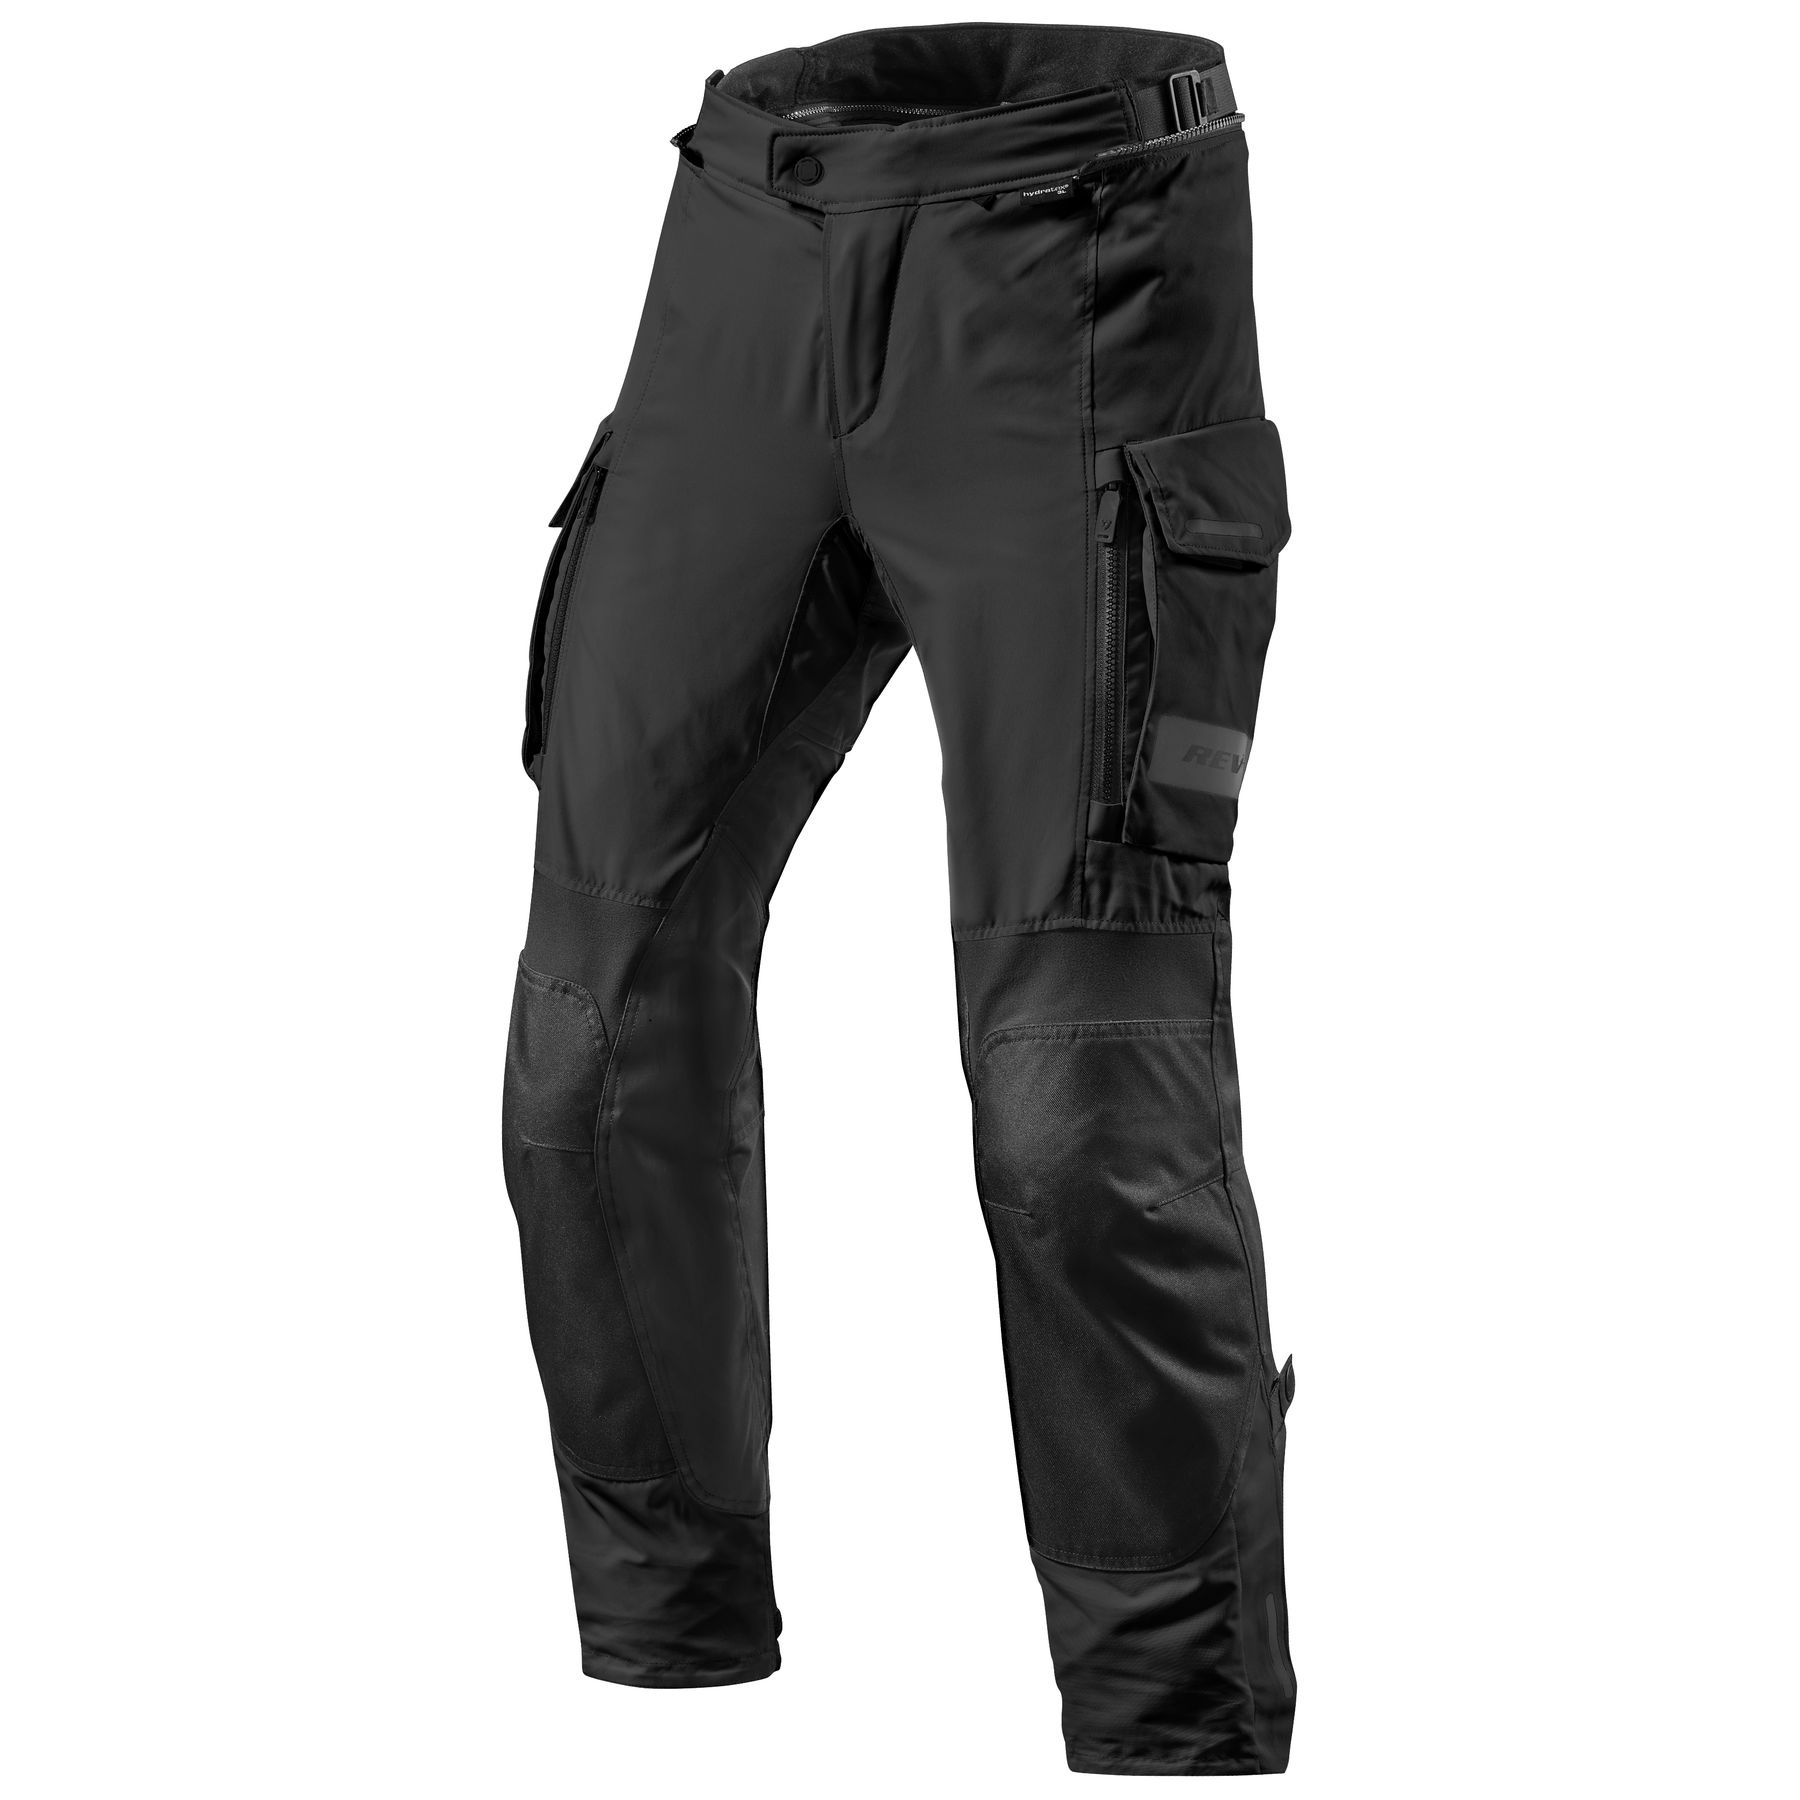 Bikers Gear Australia Classic Cut Kevlar Lined Protective Motorcycle Trouser Kevlar Jeans with Removable CE1621-1 Armour